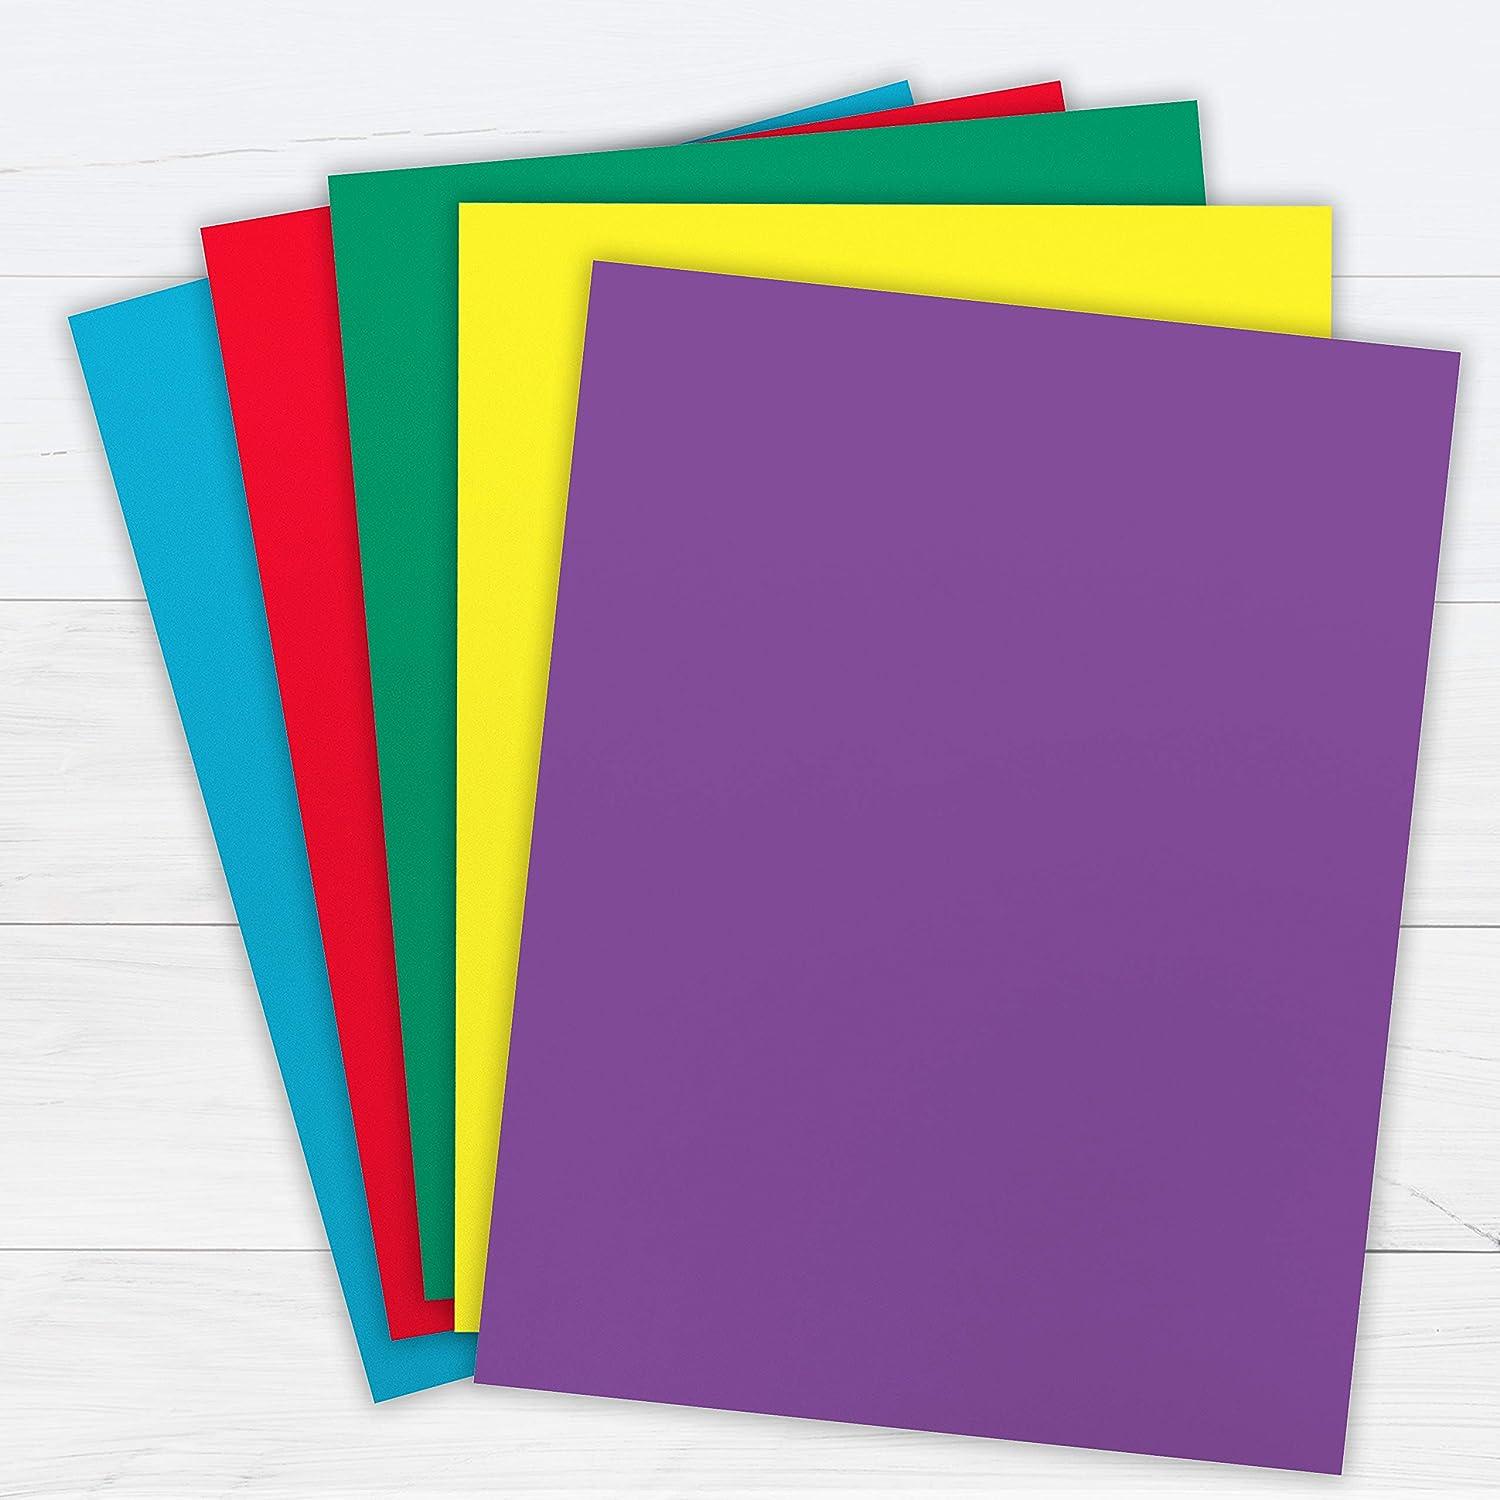 110lb Index Cherry Pink Card stock - 50 Sheets per Pack (8 x 10) 